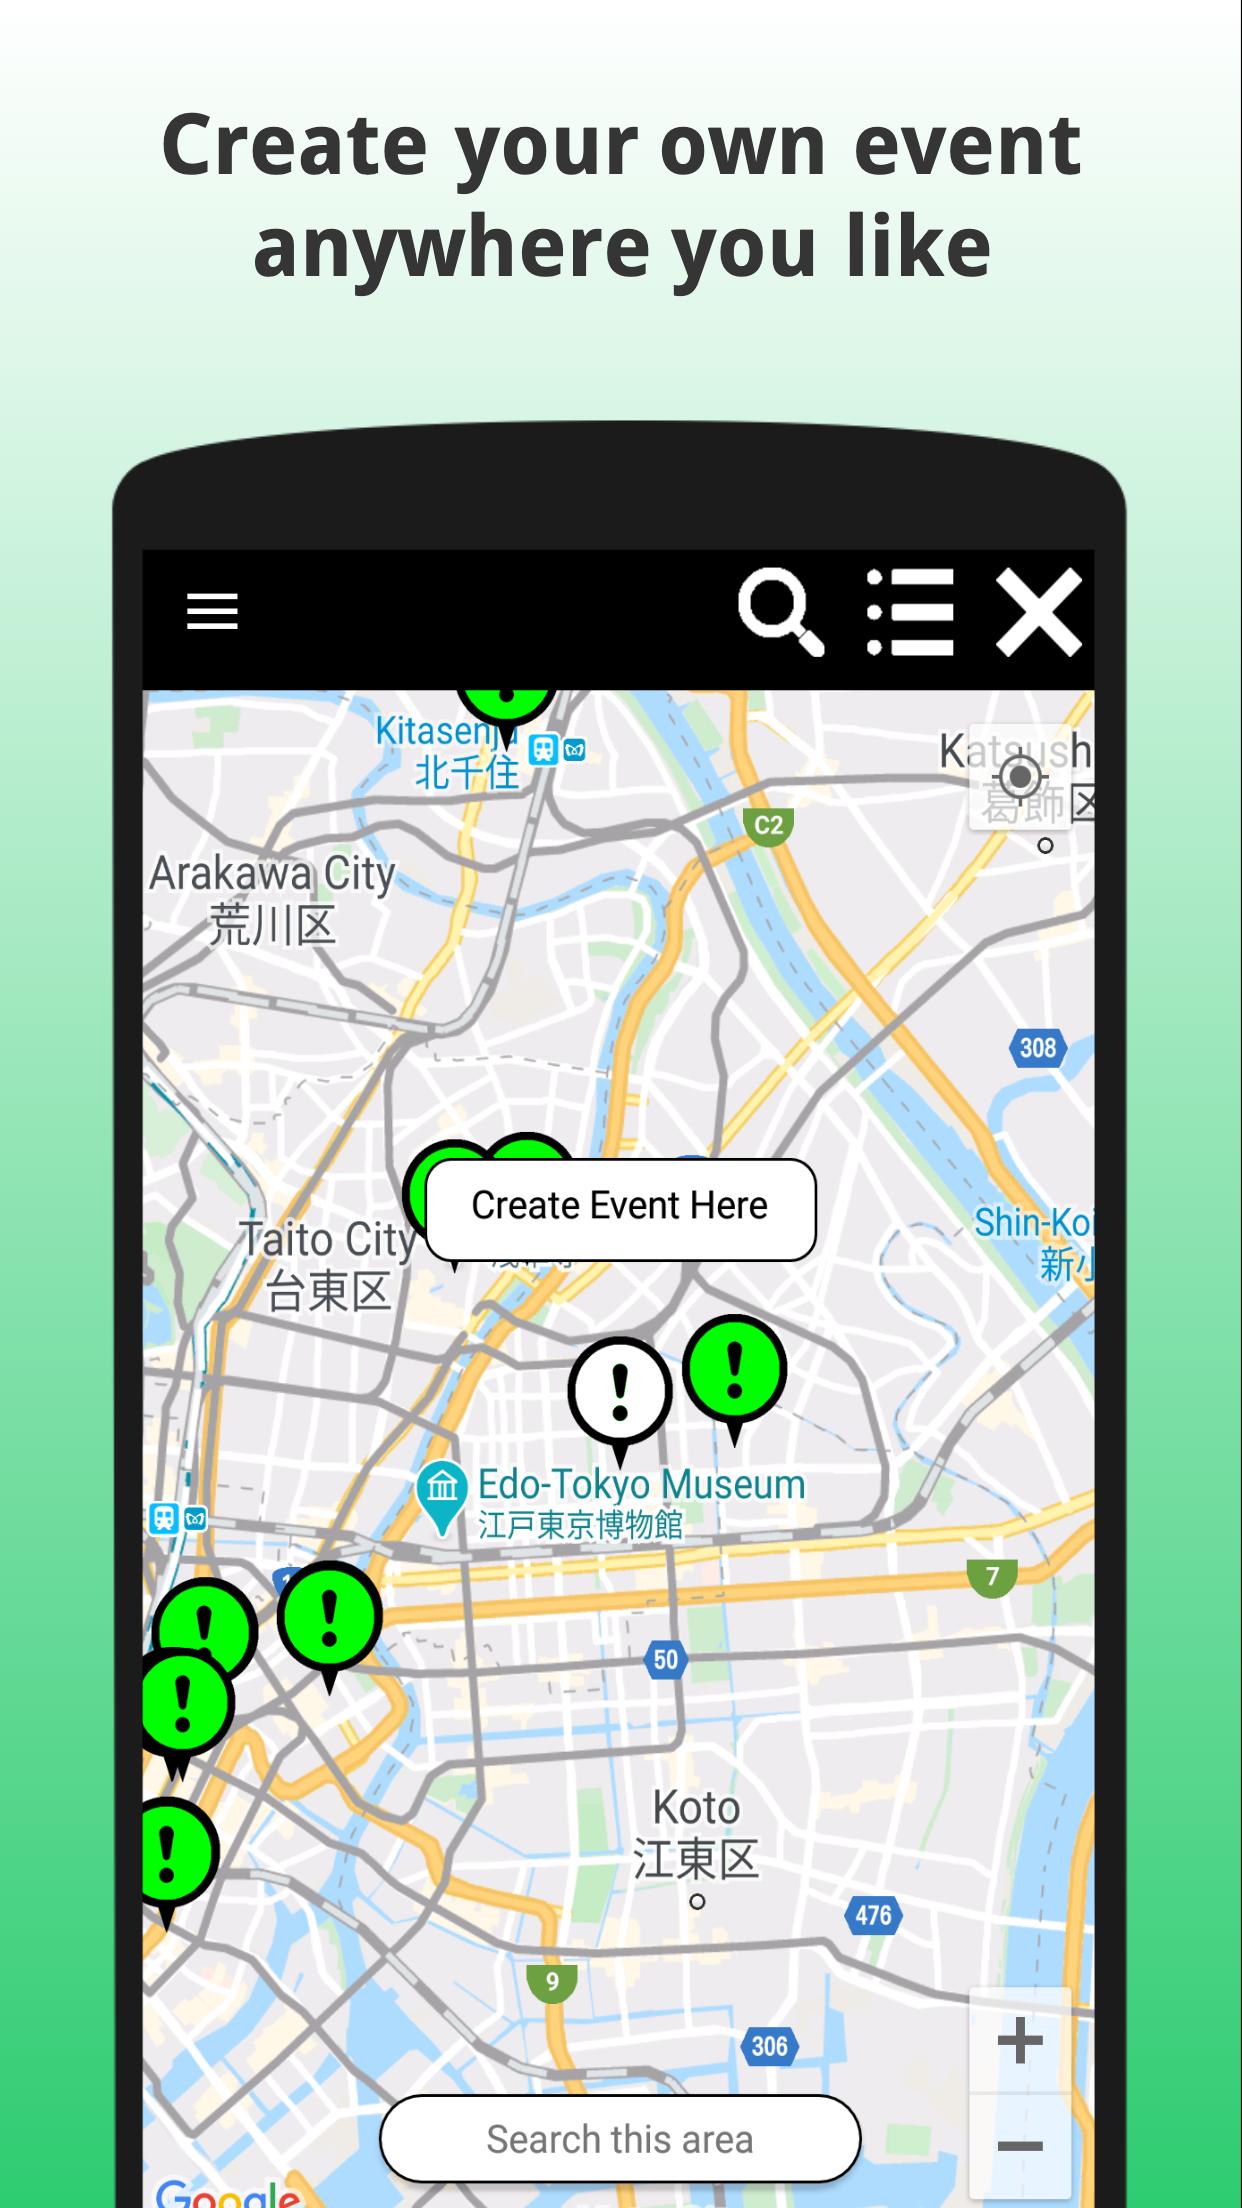 EVENTA - Search & Post Events Near You in Japan 1.0.15 Screenshot 6